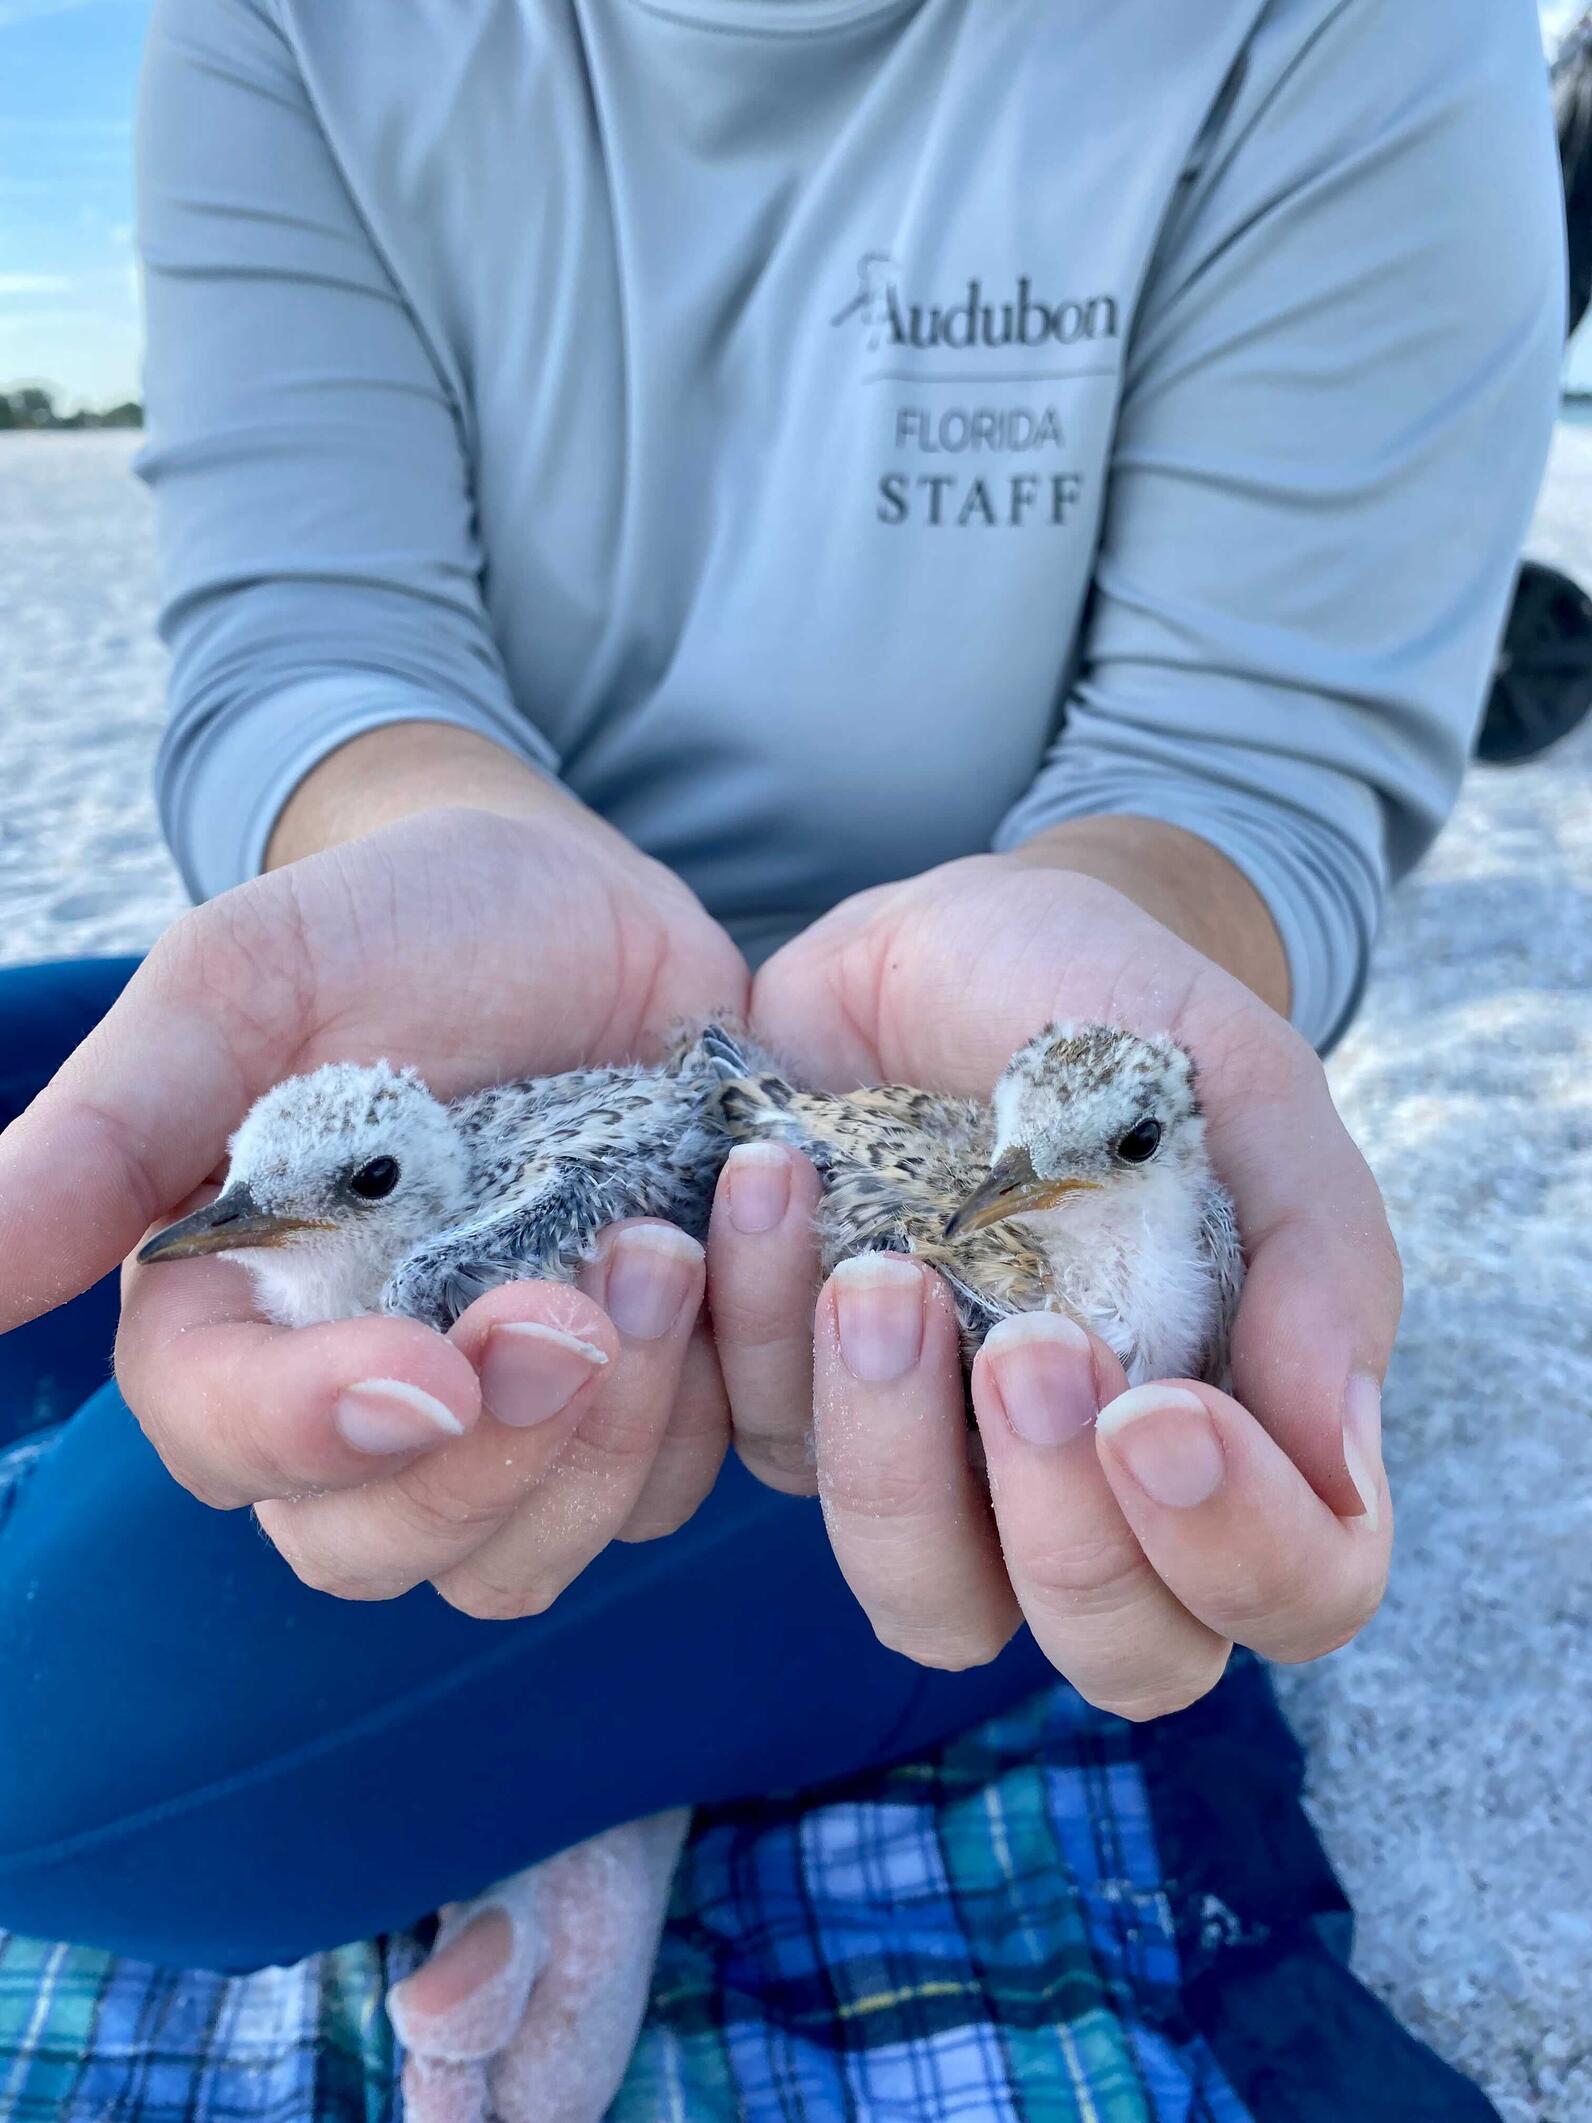 Banding Least Terns. Kylie bands least tern chicks. This photo was taken in compliance with state and federal research permits.